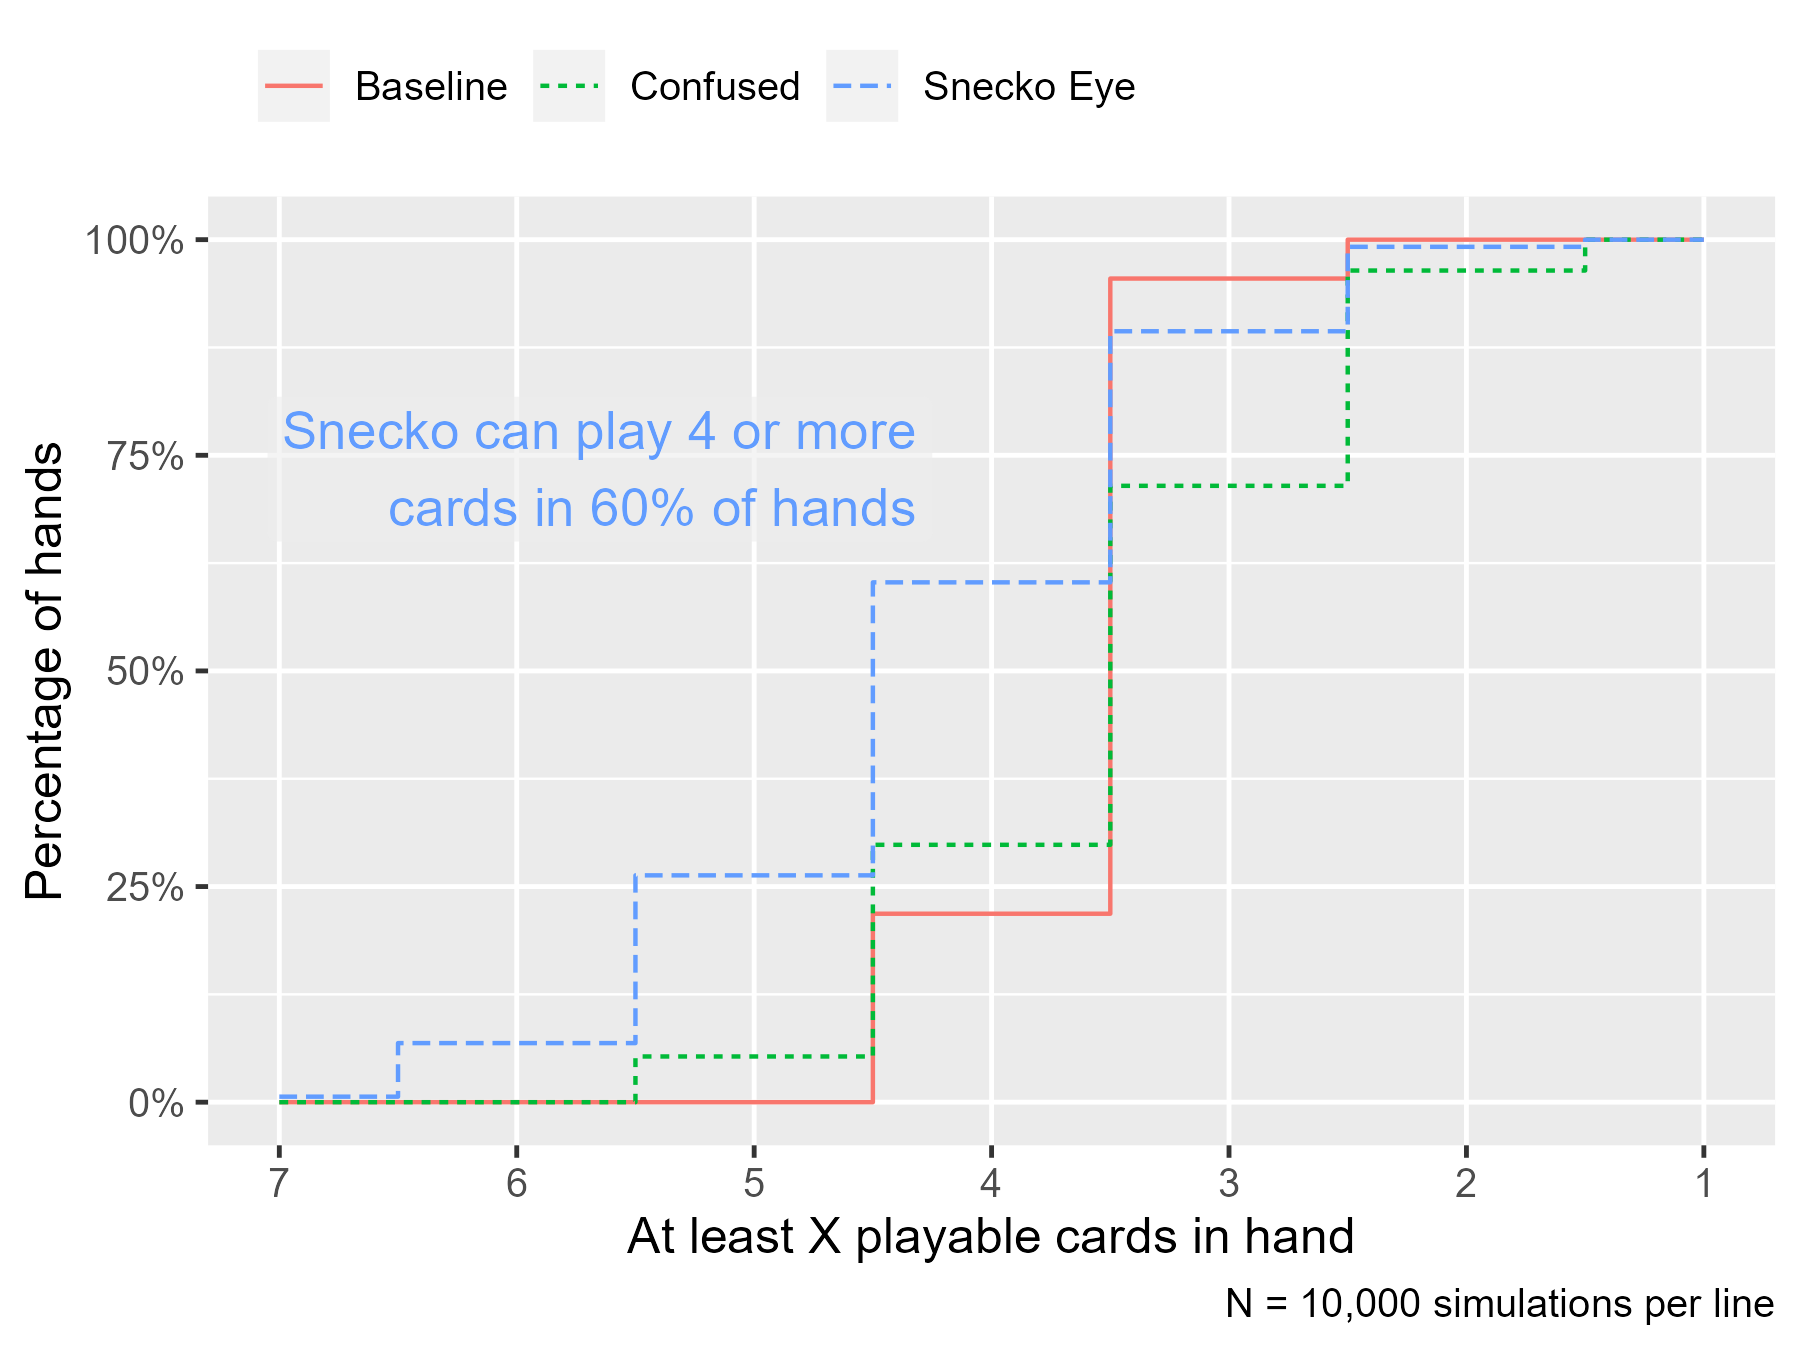 A plot of the ECDF for the proportion of hands with at least x playable cards. Snecko dominates the other lines in the plot because we can play more cards per turn with it. There is a caption at the center of the plot that says 'Snecko can play 4 or more cards in 60% of hands'.